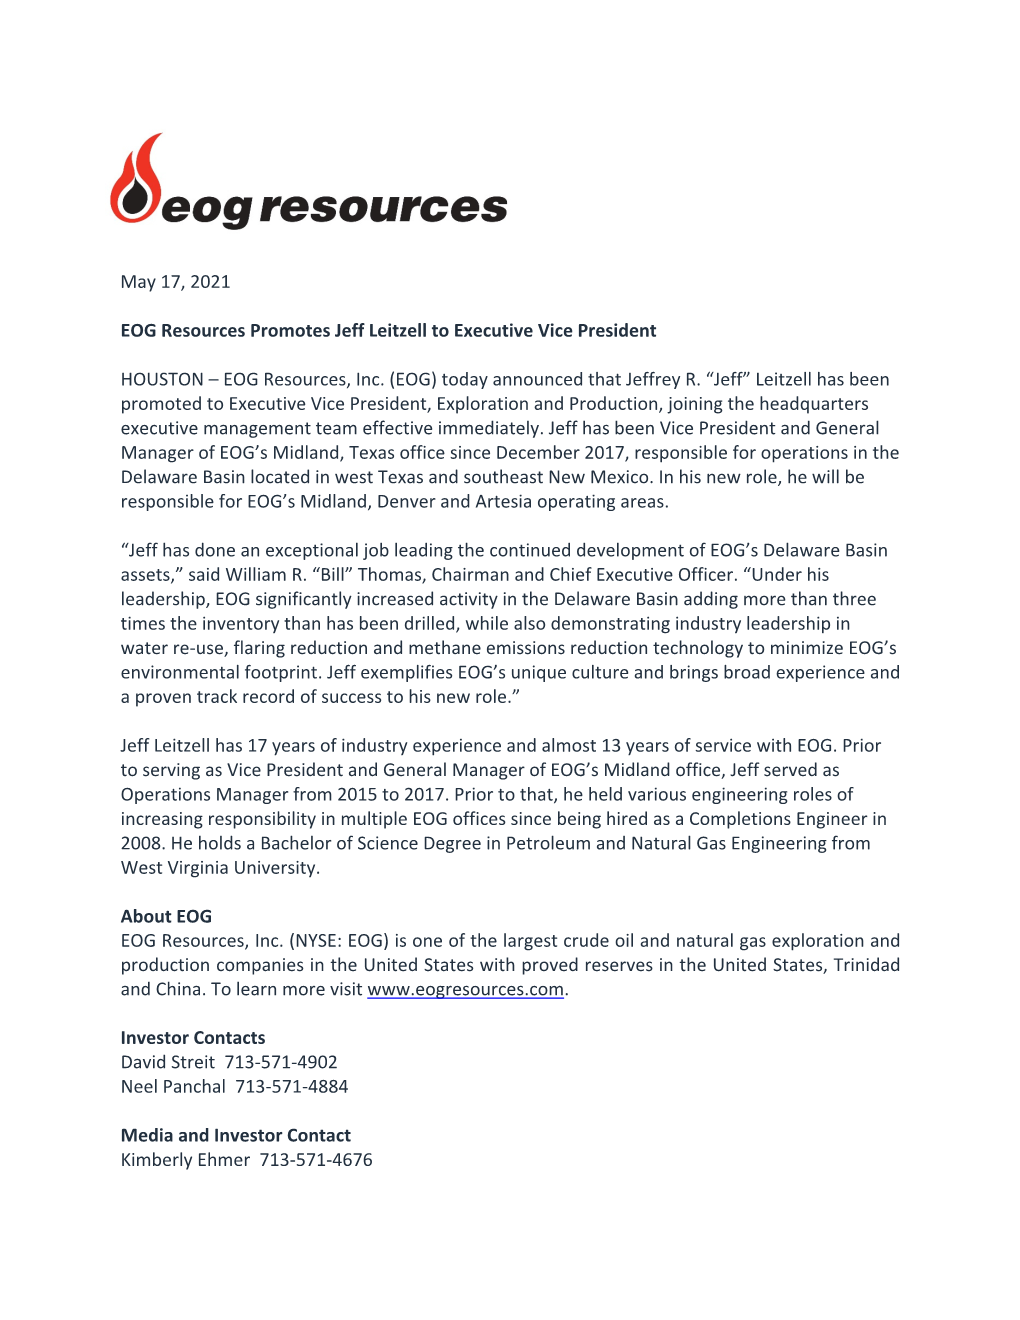 May 17, 2021 EOG Resources Promotes